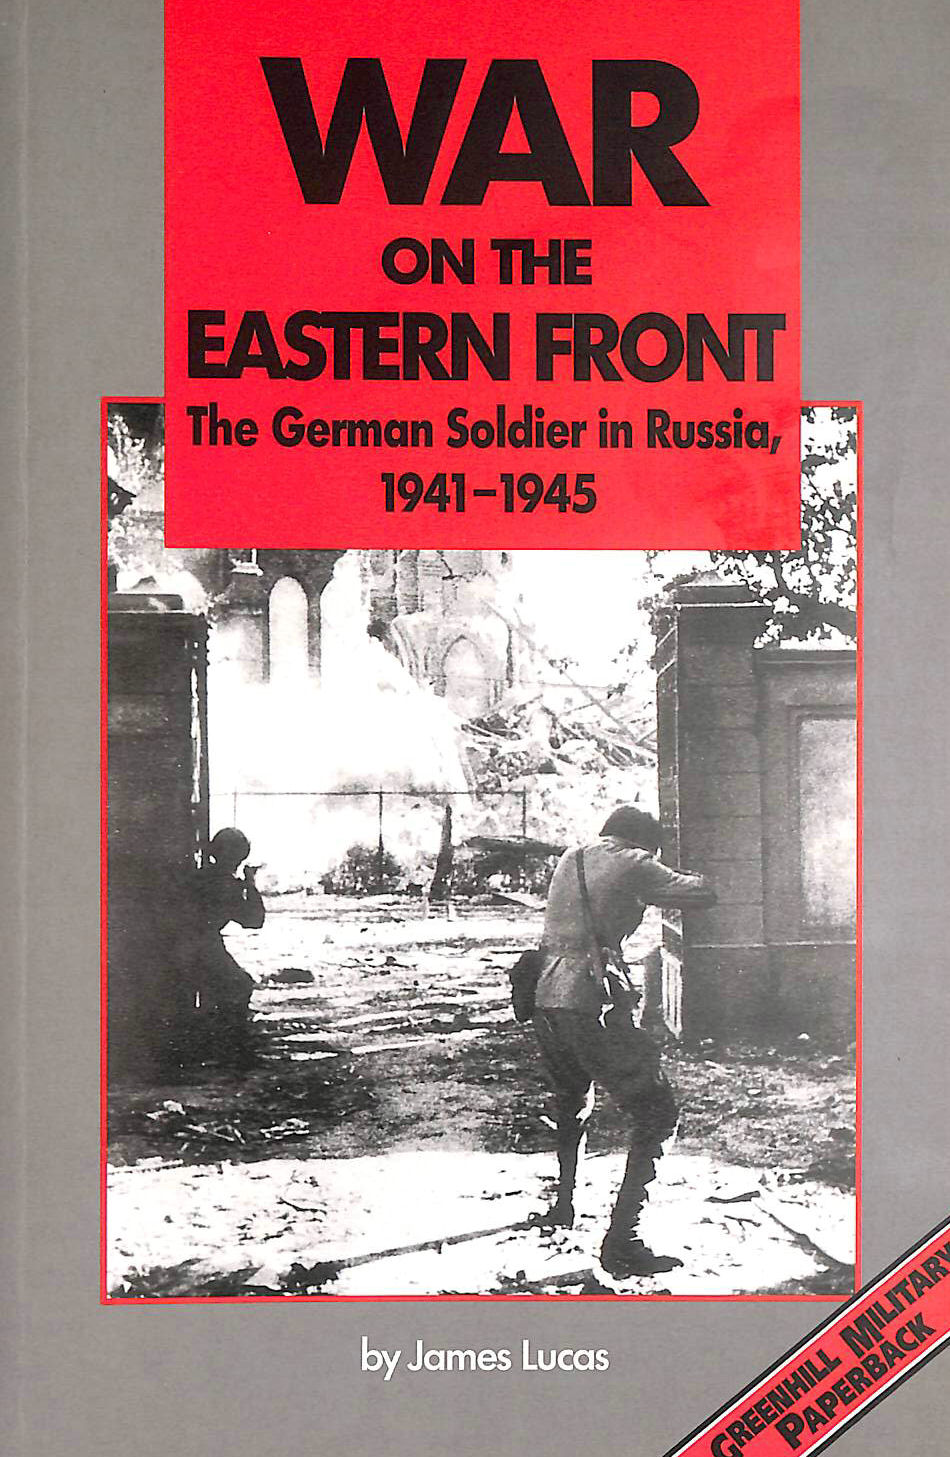 LUCAS, JAMES - War on the Eastern Front: The German Soldier in Russia, 1941-45 (Greenhill Military Paperback S.)